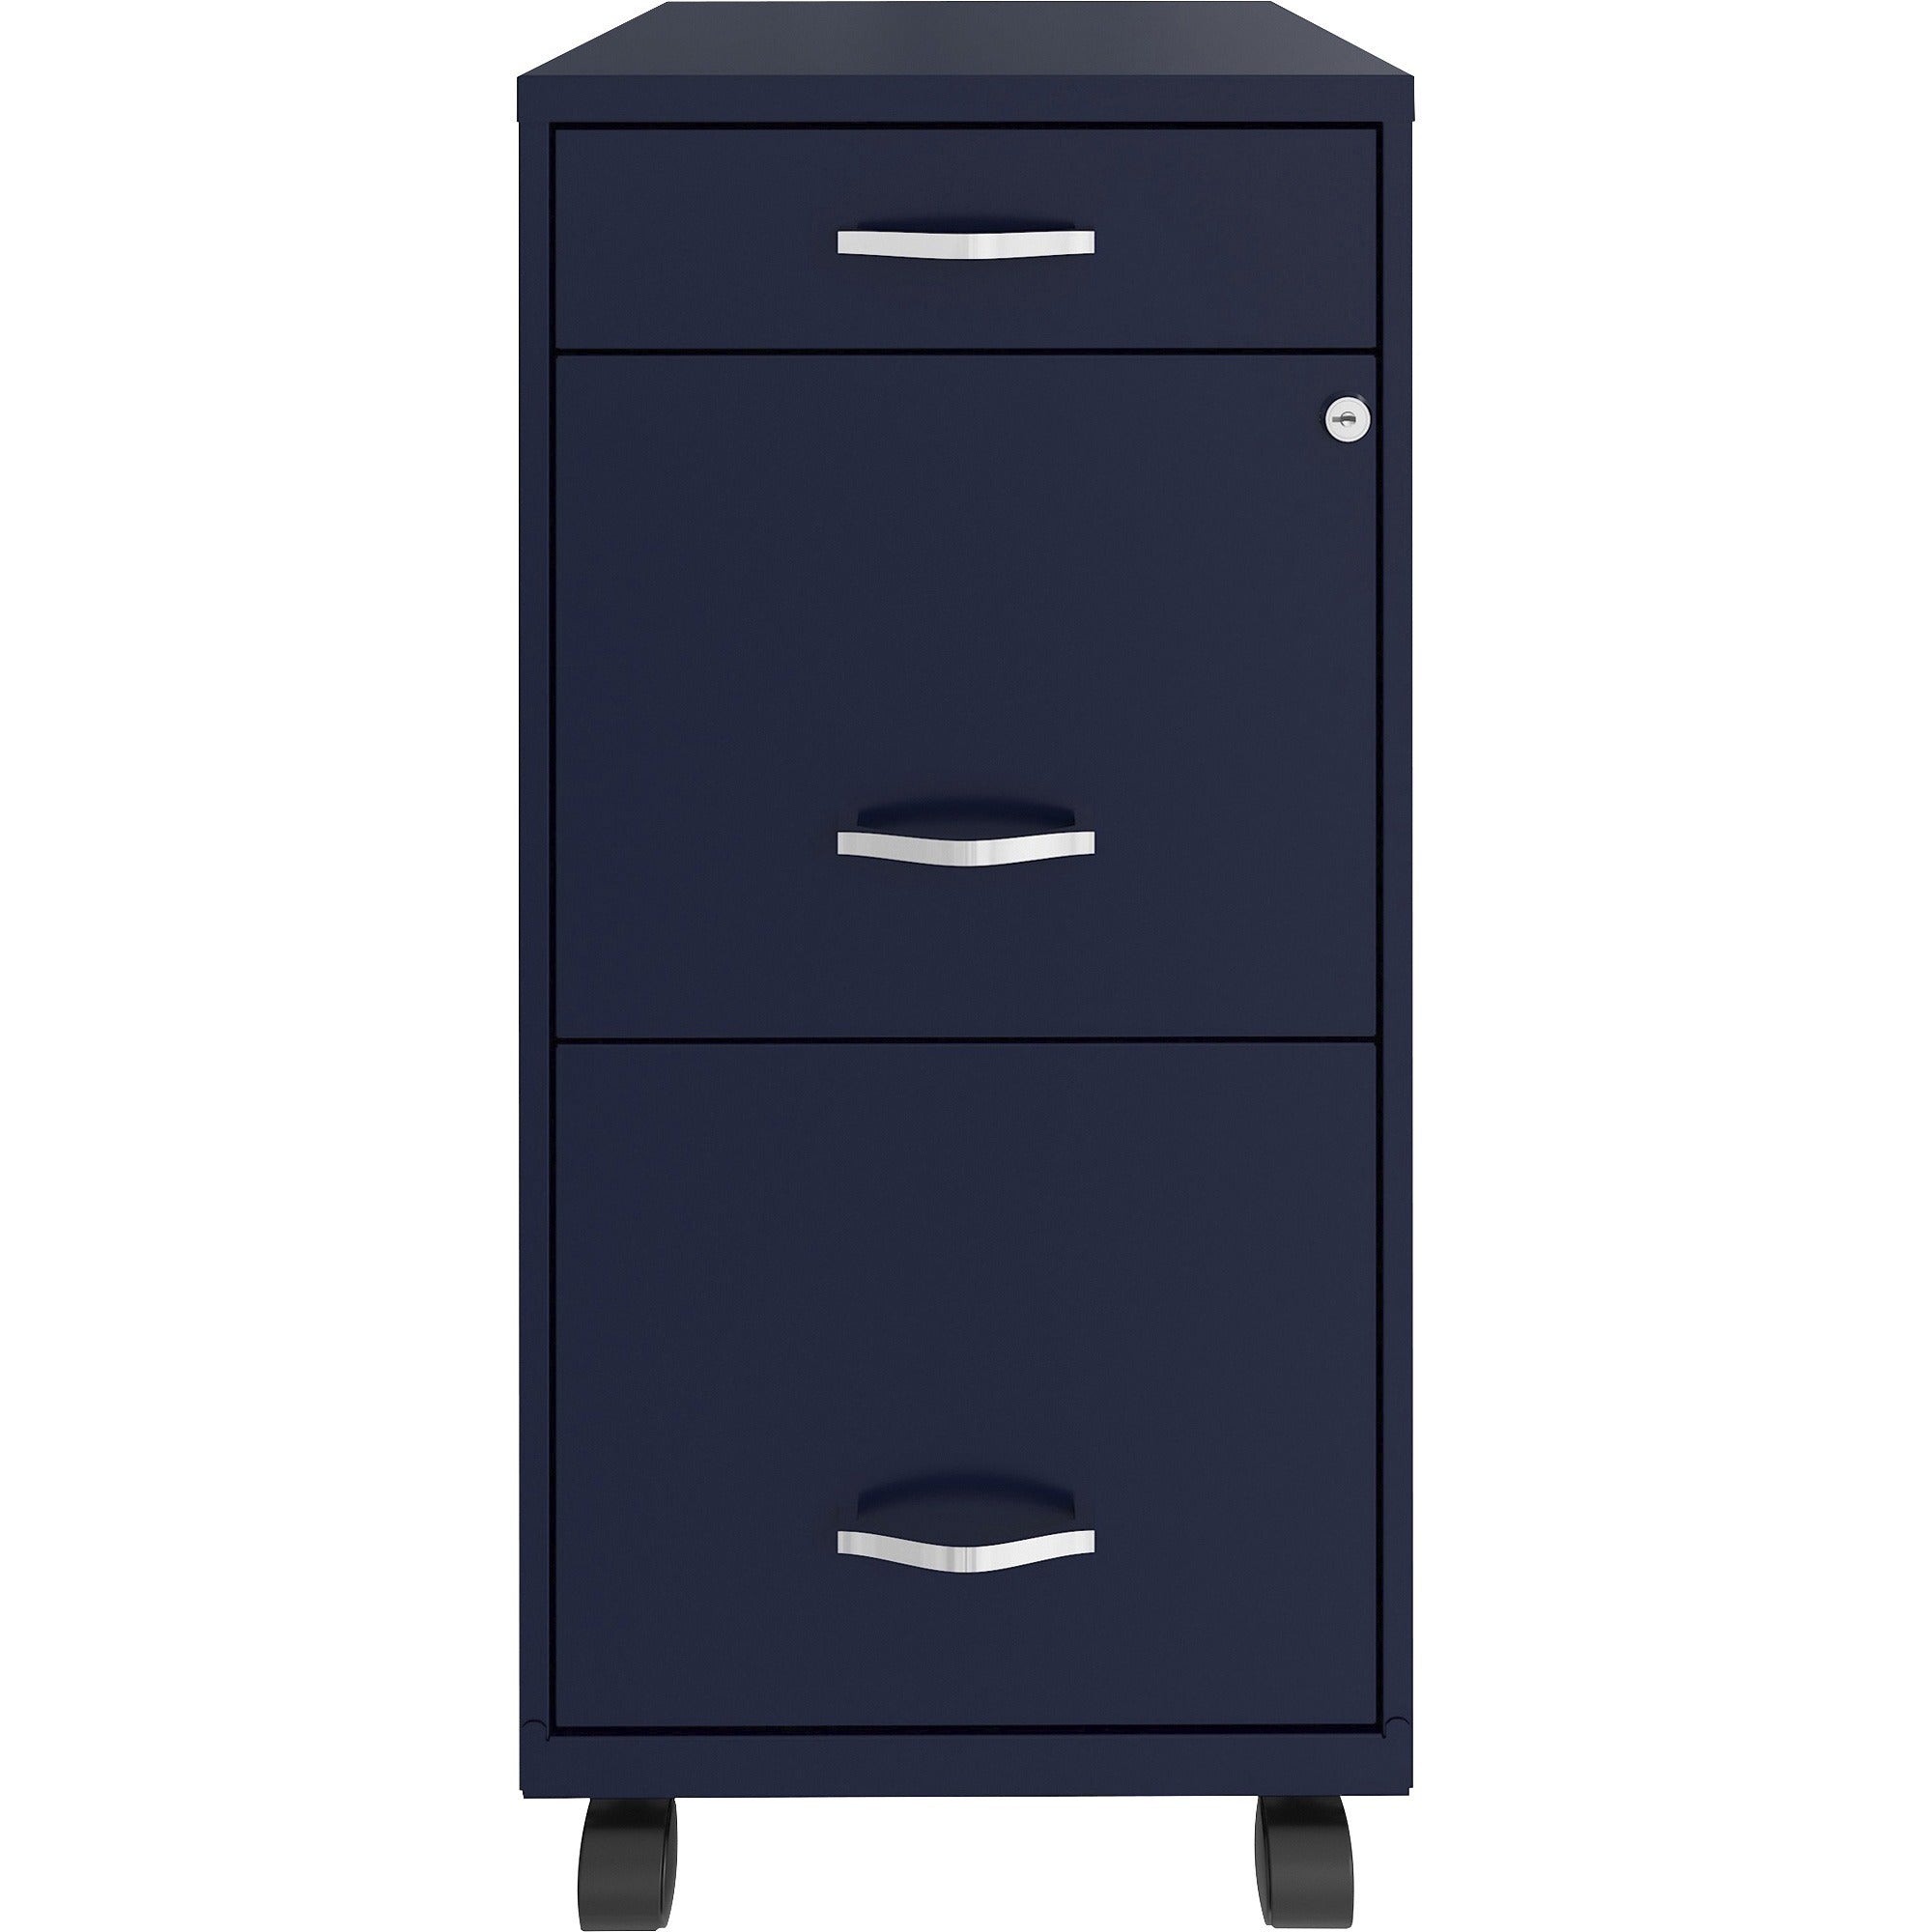 nusparc-mobile-file-cabinet-142-x-18-x-295-3-x-drawers-for-file-box-letter-mobility-locking-drawer-glide-suspension-3-4-drawer-extension-cam-lock-nonporous-surface-blue-painted-steel-recycled_nprvf318bmny - 2